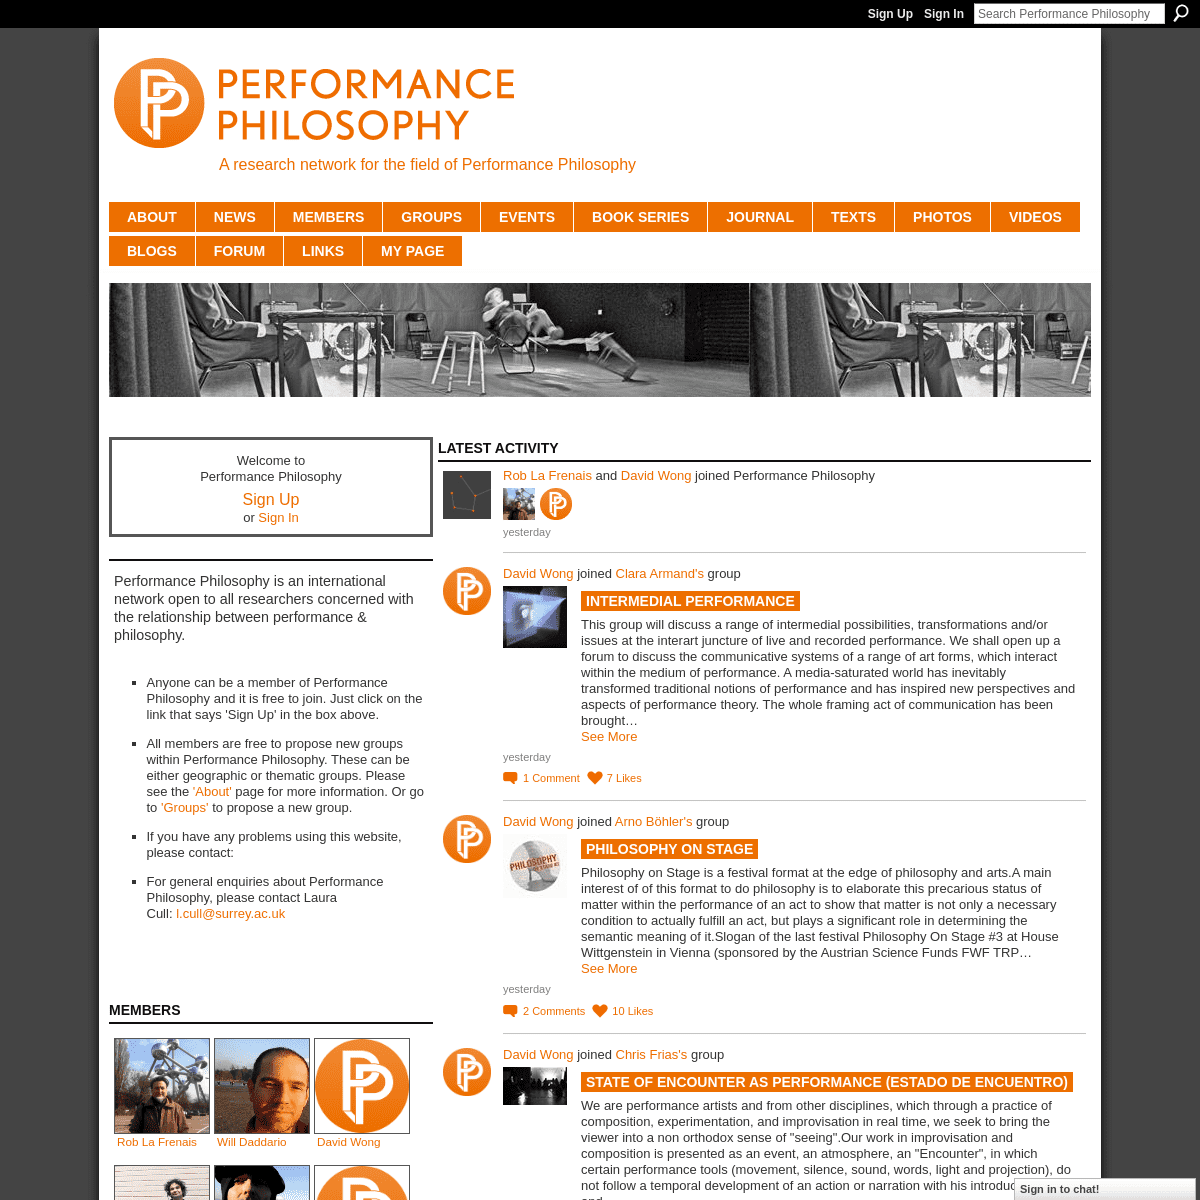 A complete backup of performancephilosophy.ning.com